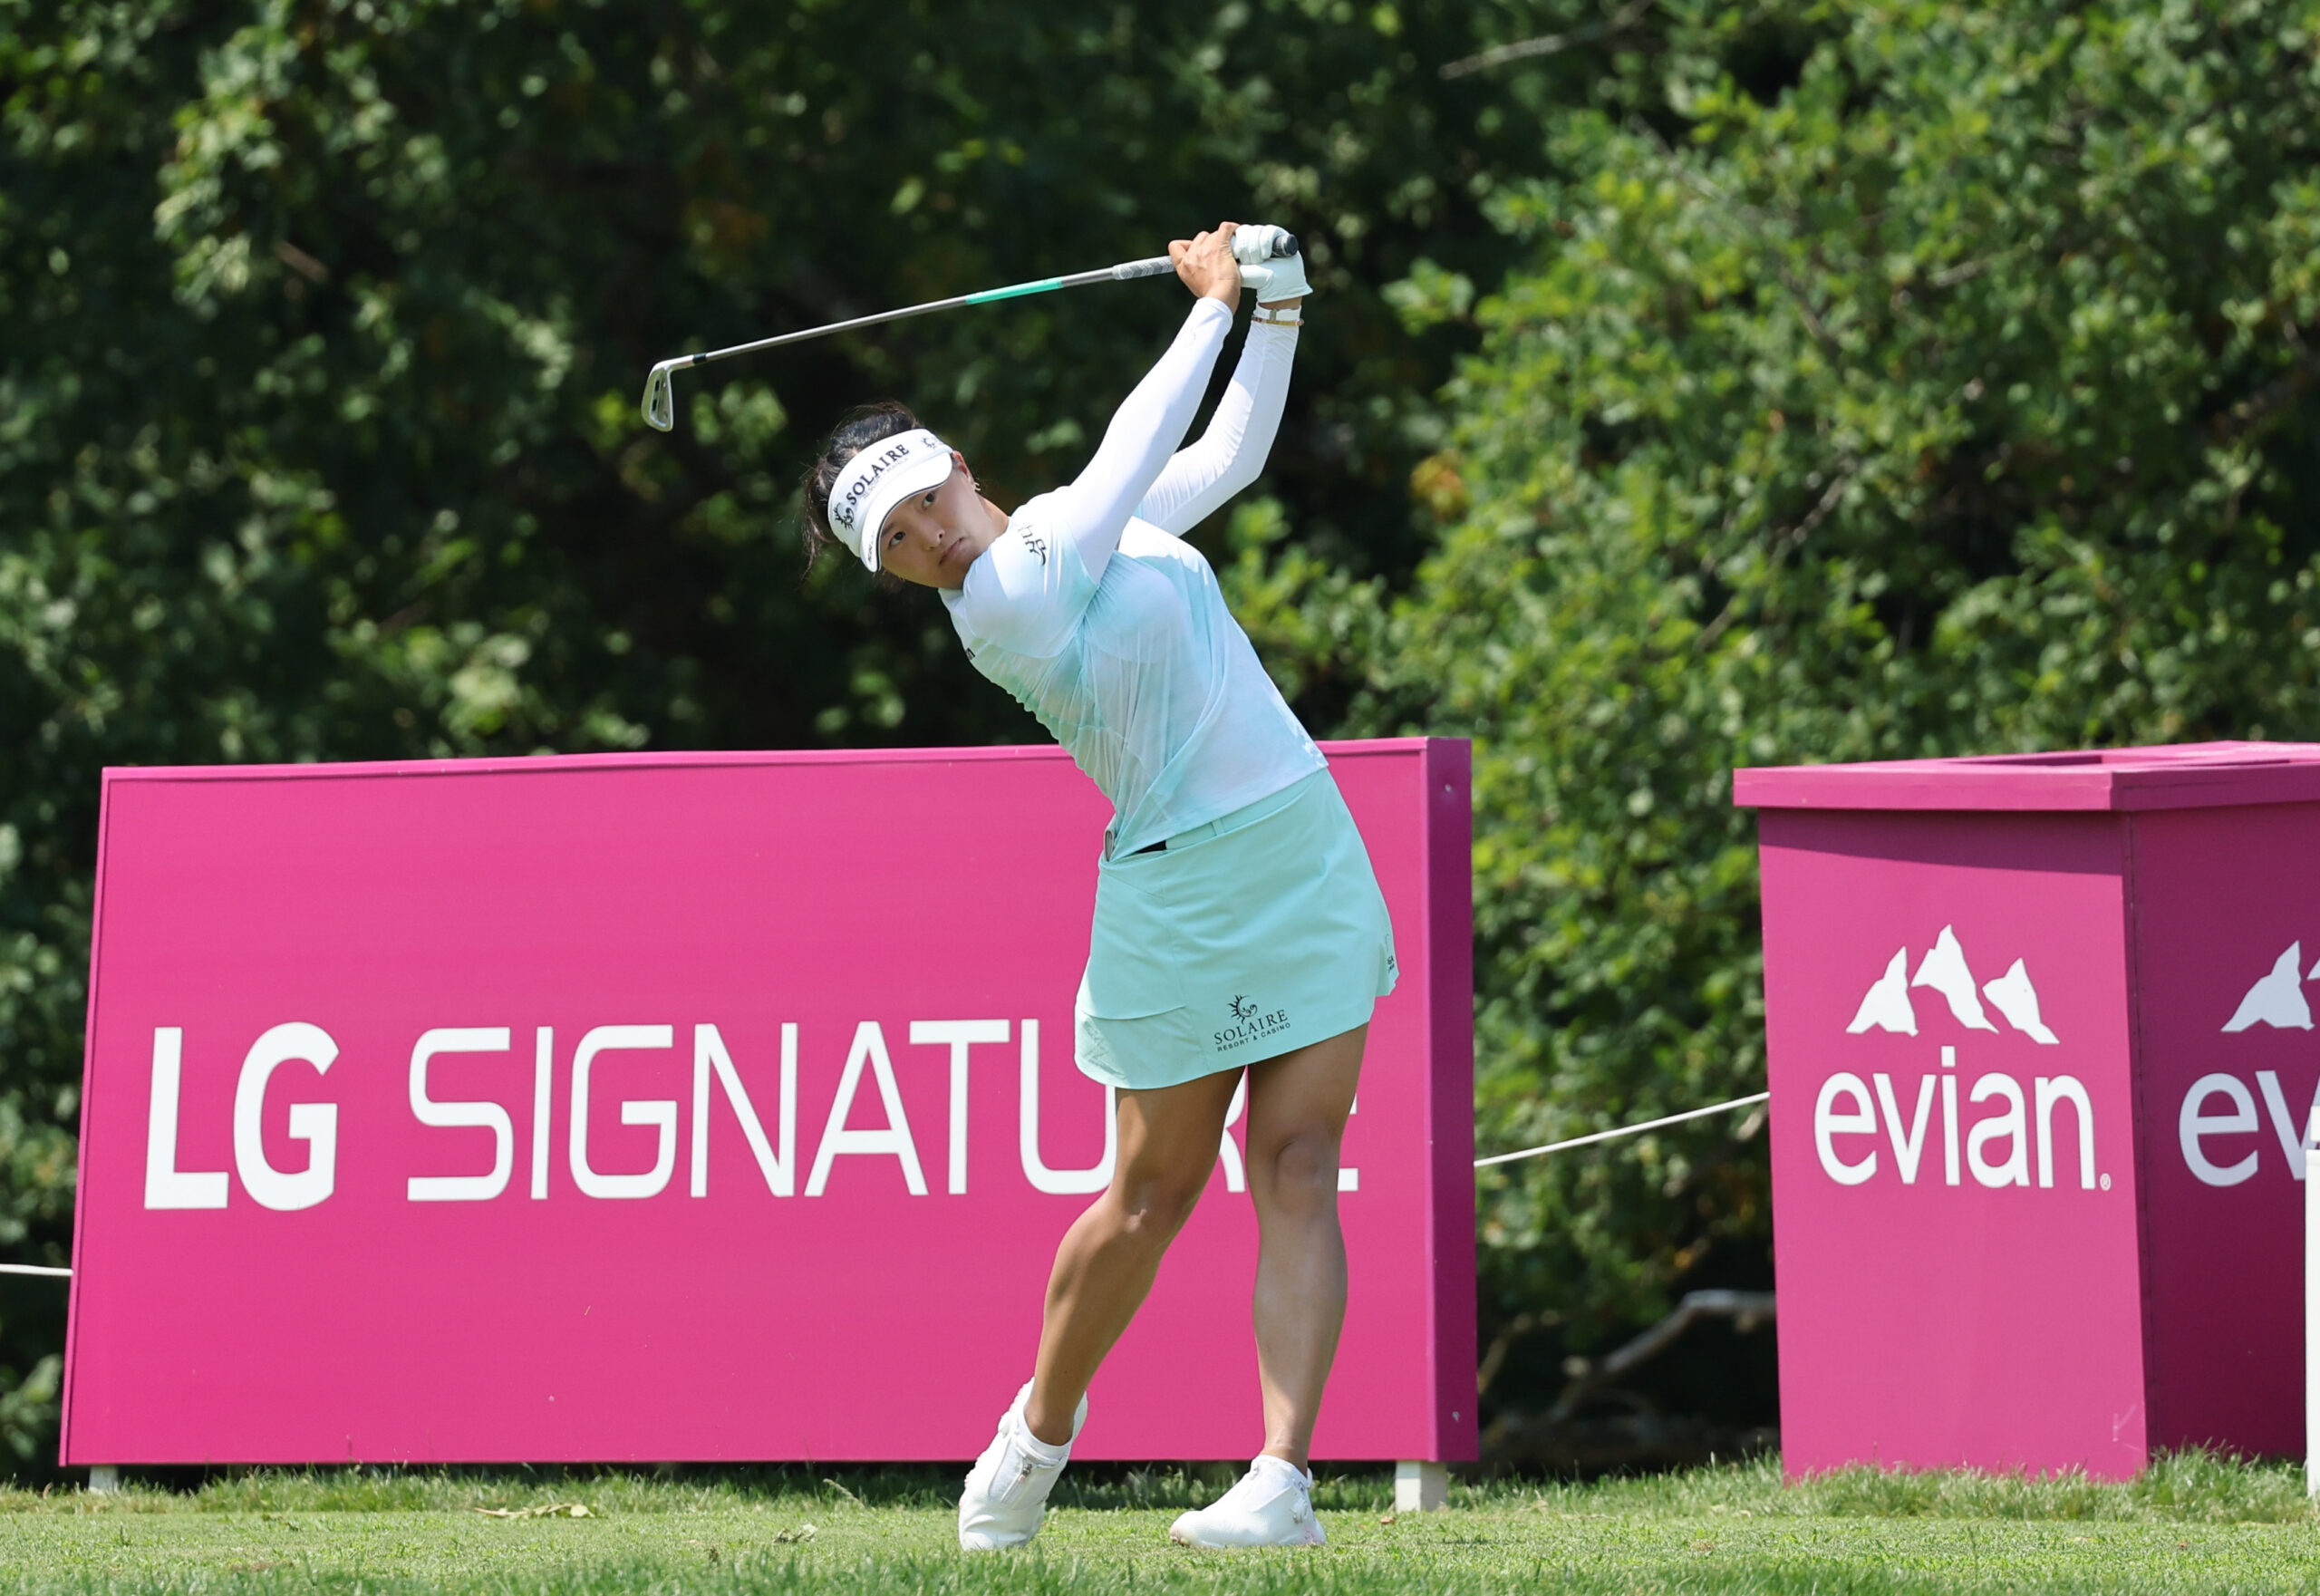 Golfer Ko Jin-young teeing off in front of LG SIGNATURE signage at the Amundi Evian Championship